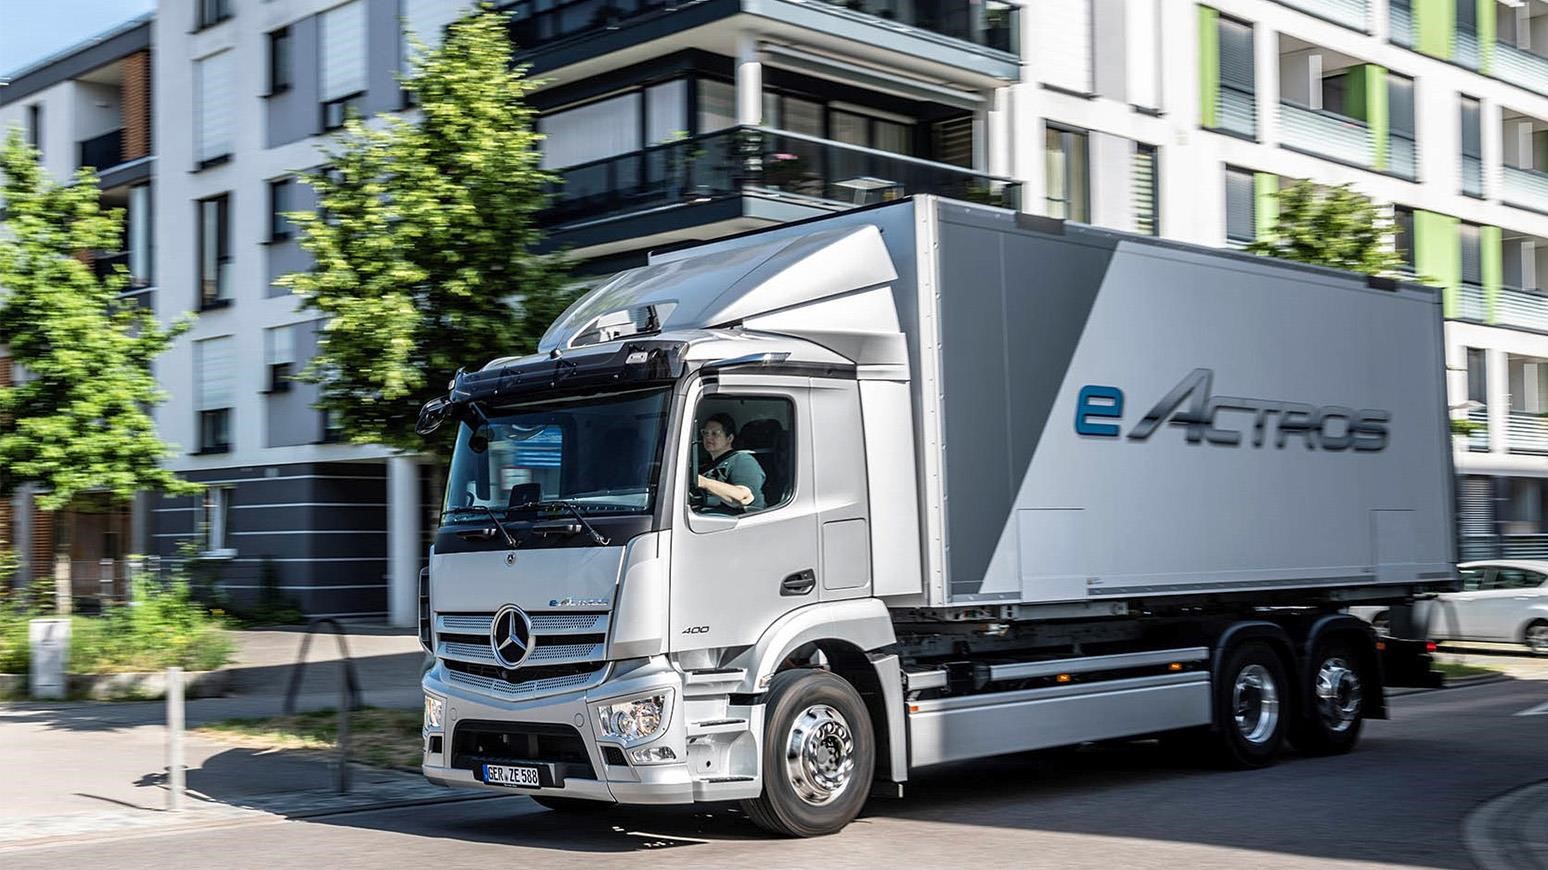 Mercedes-Benz Trucks Lands A Sensational Awards Double & Now Sets Its Sustainability Sights On An Exciting 2022